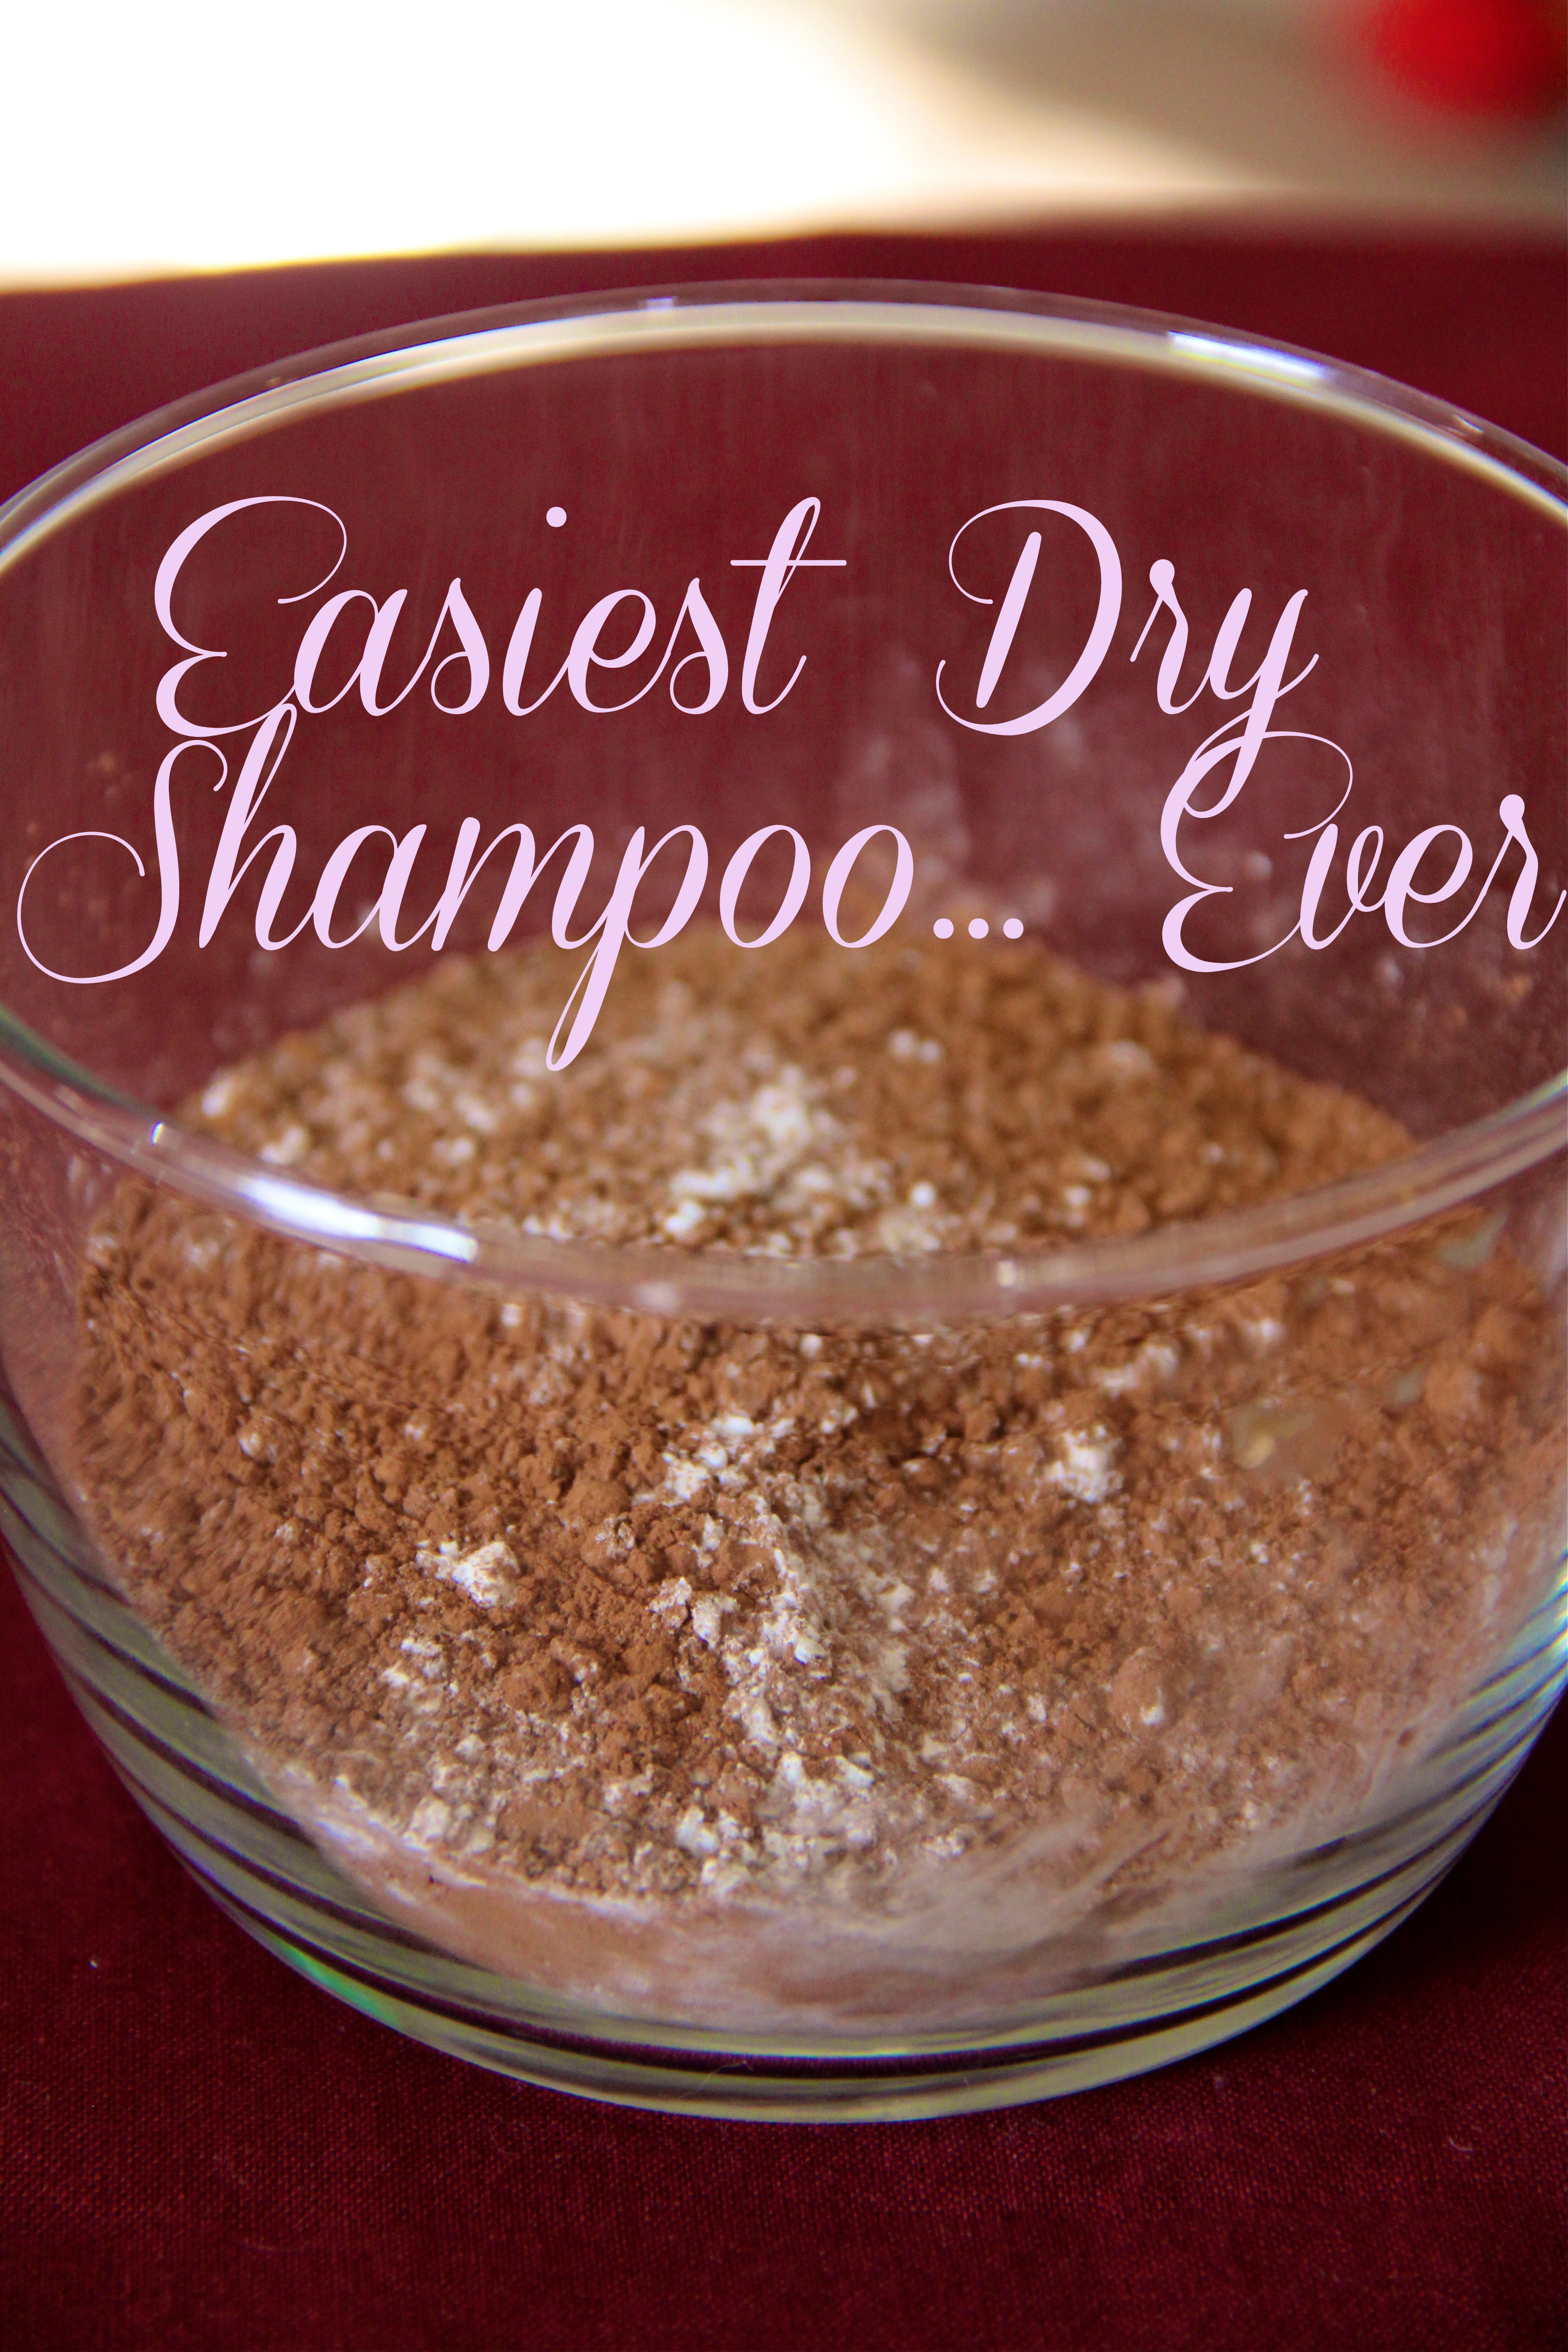 Easiest Dry Shampoo Ever| girl about columbus